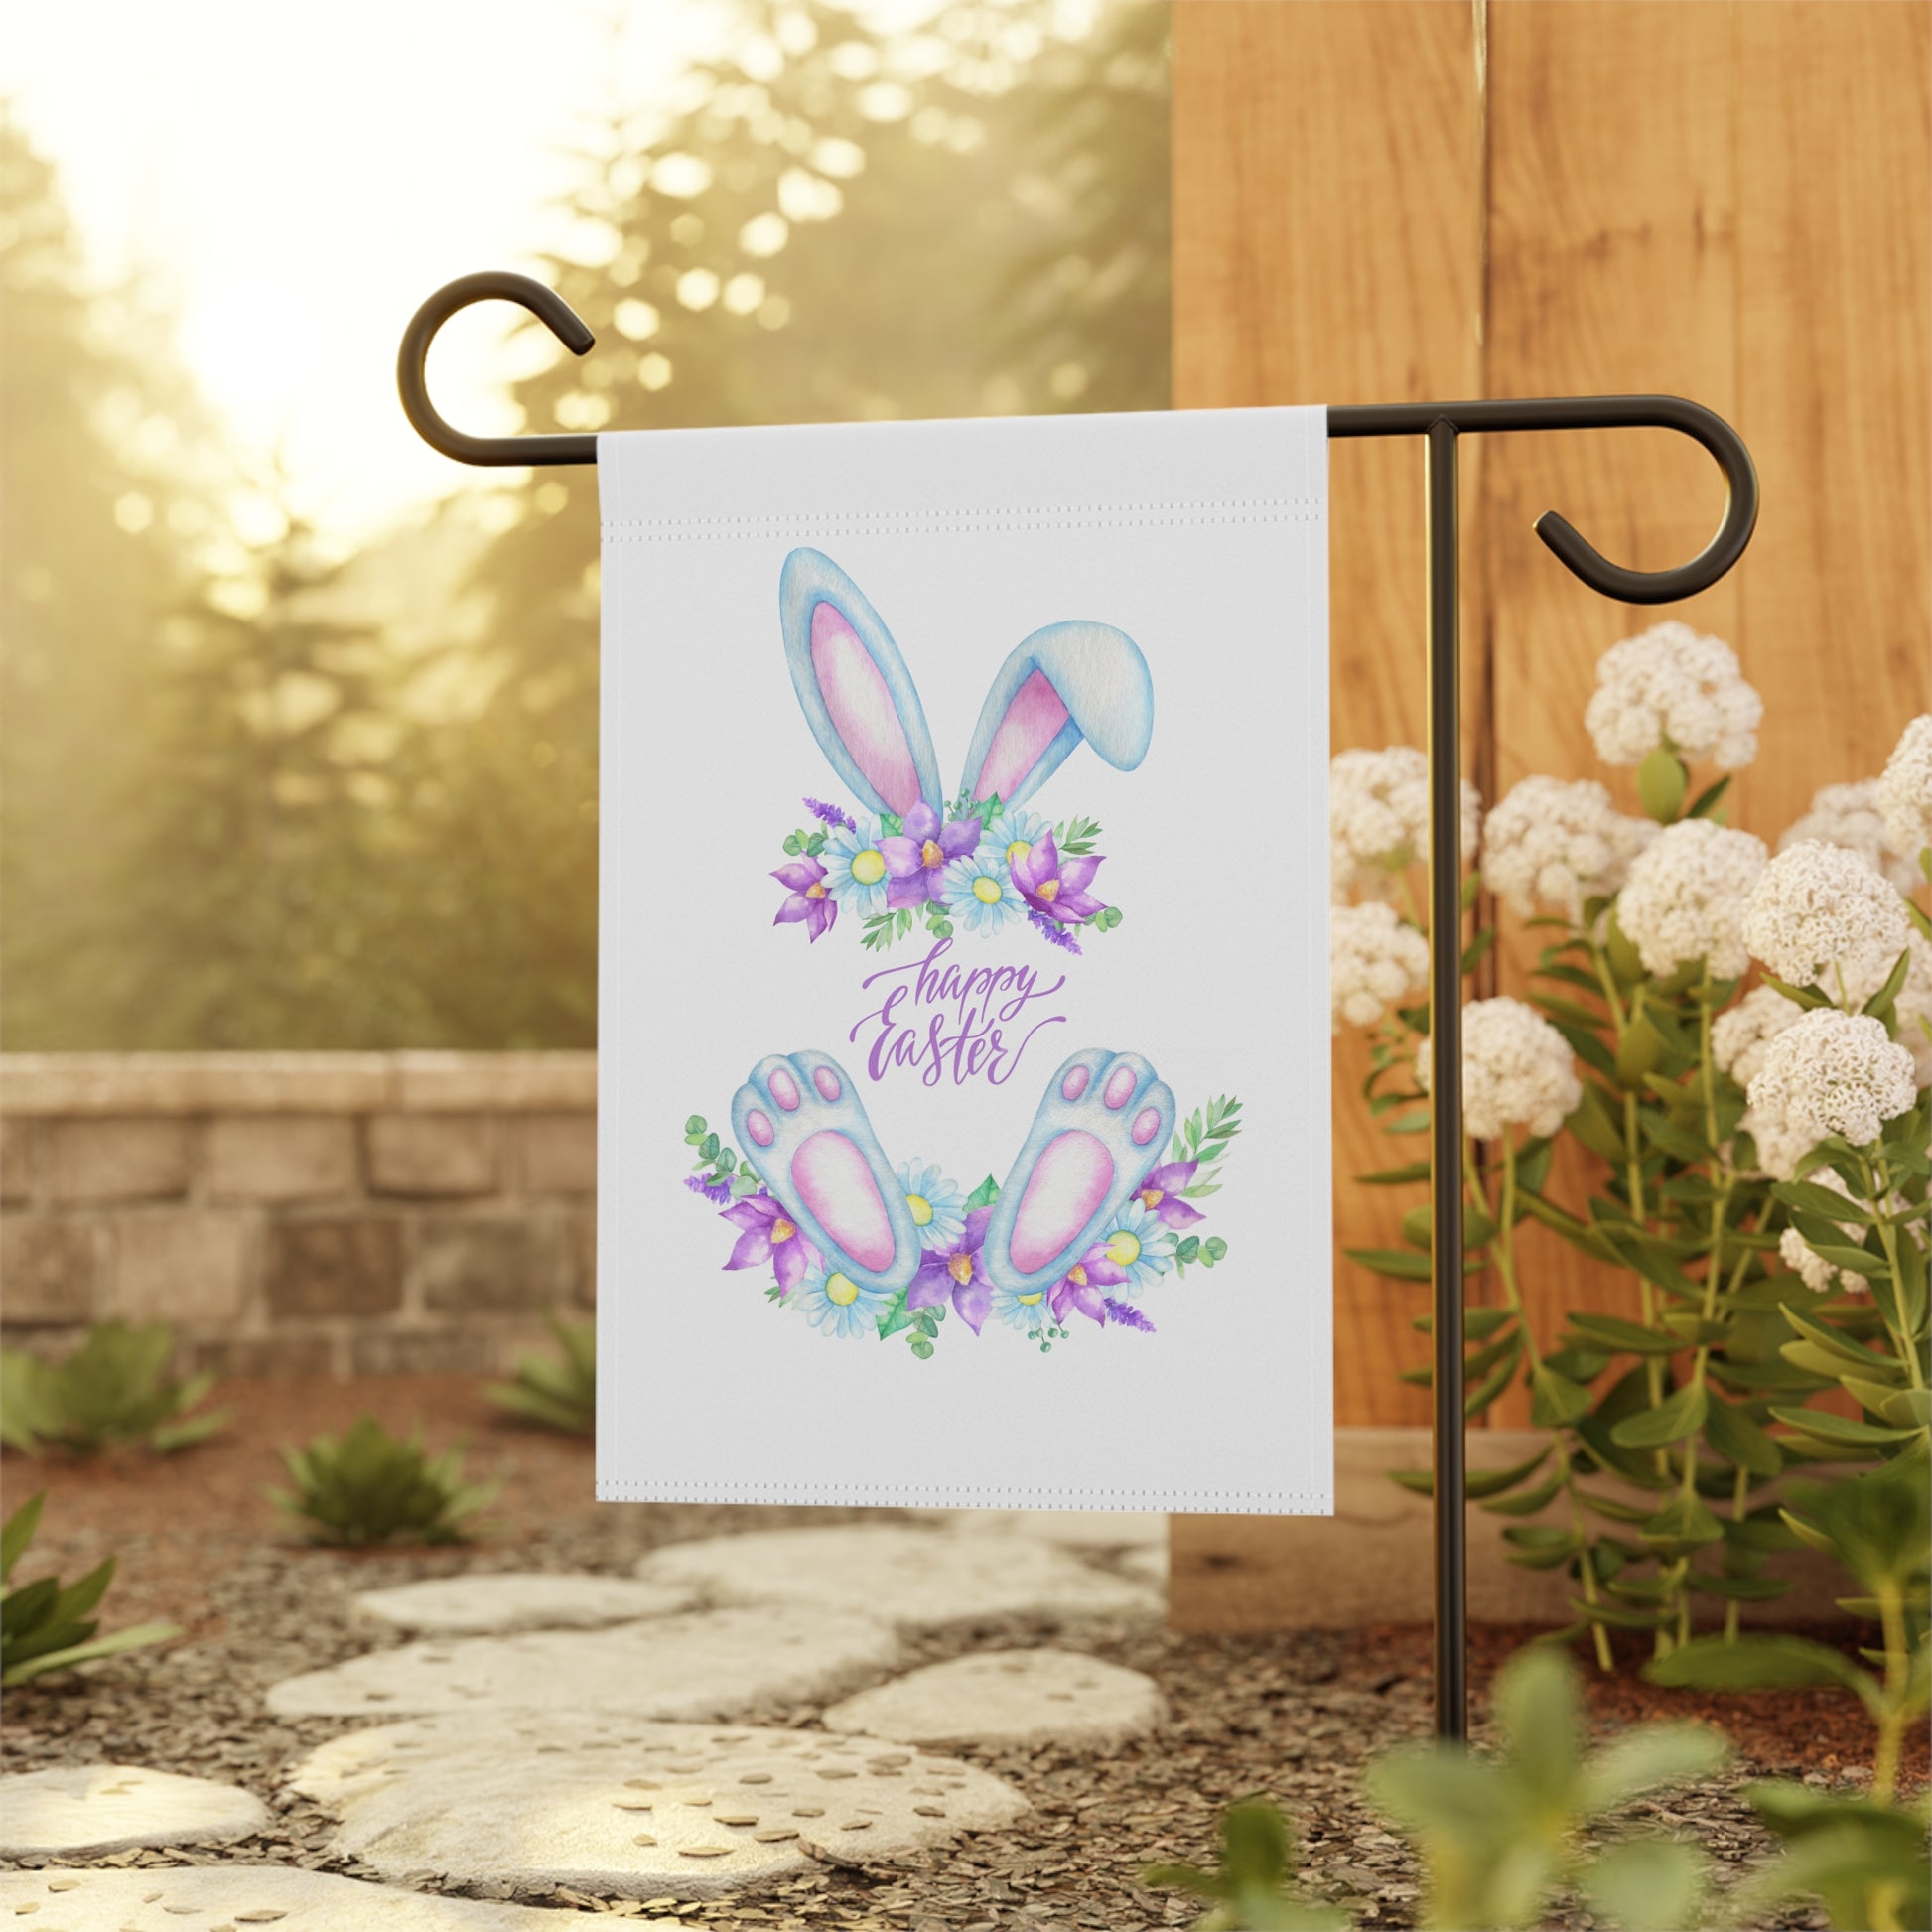 Decorate your garden with this adorable Printify Easter Bunny garden flag made from polyester fabric.